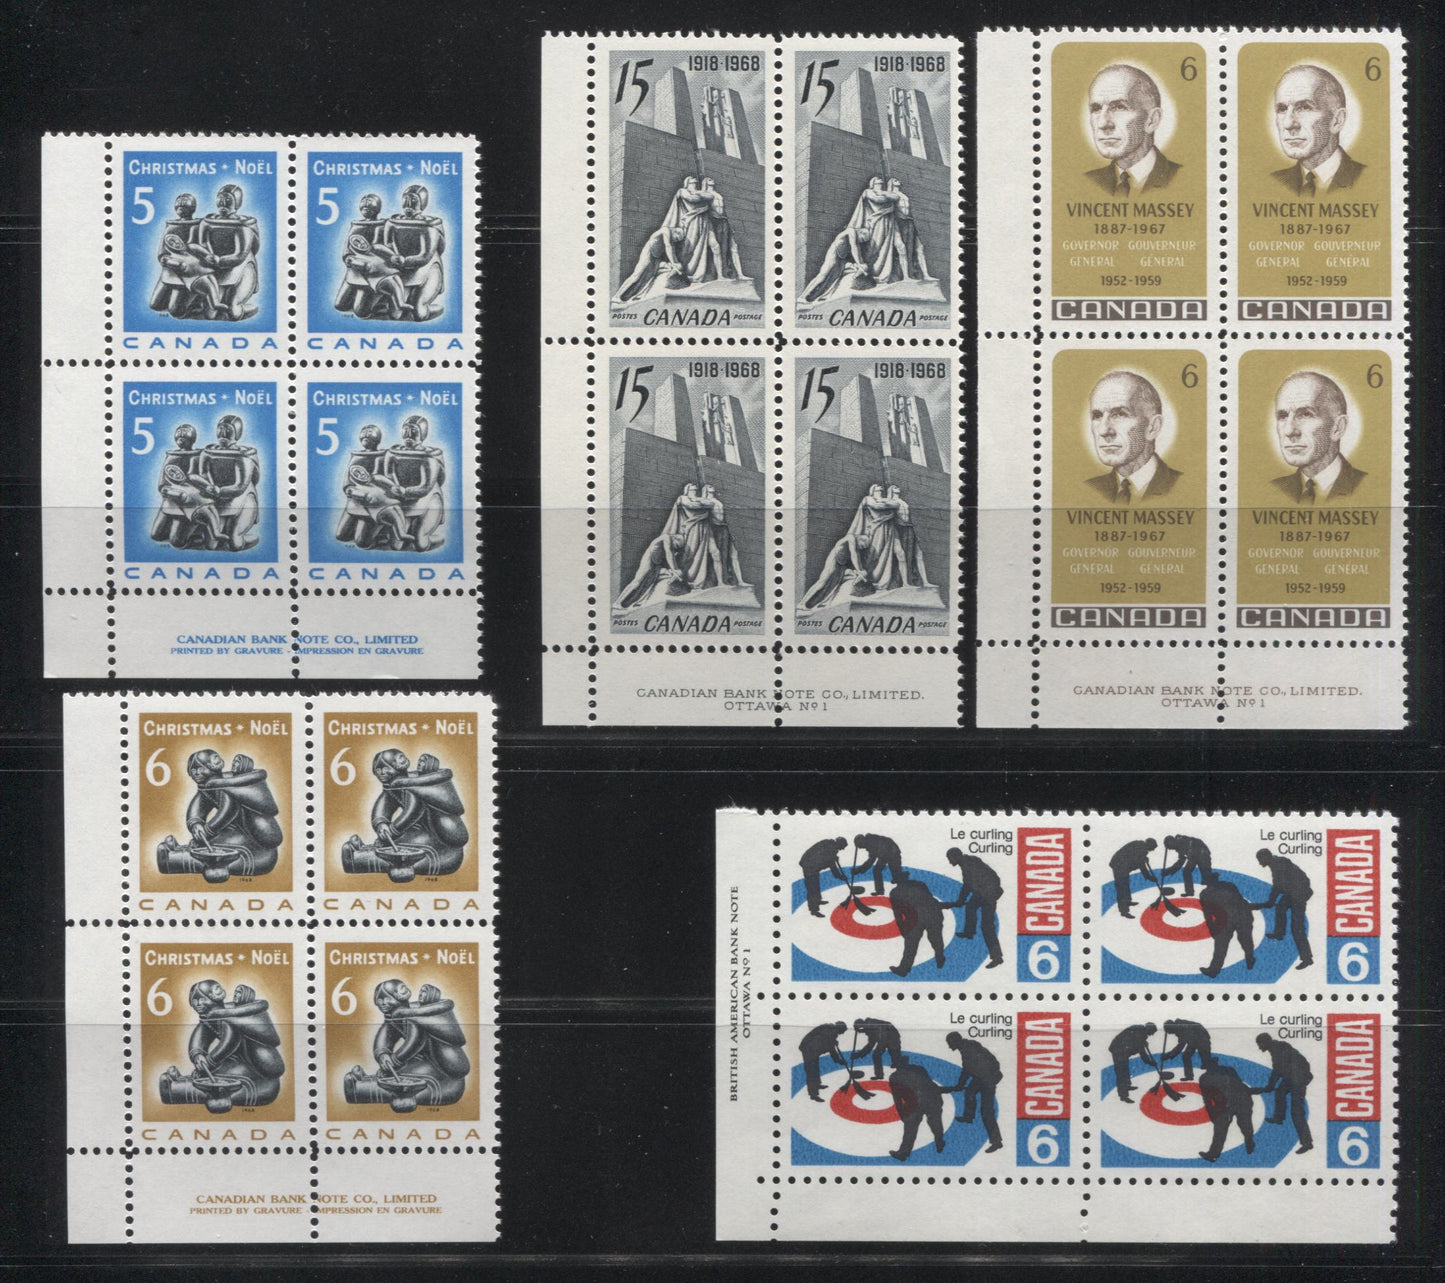 Lot 83 Canada #486, 488-491 5c, 6c & 15c Slate - Yellow Olive & Dark Brown Vimy Memorial - Vincent Massey, 1968-1969 Commemoratives, 5 VFNH LL Plate 1 Blocks Of 4 On Dull, Fluorescent and HB Papers